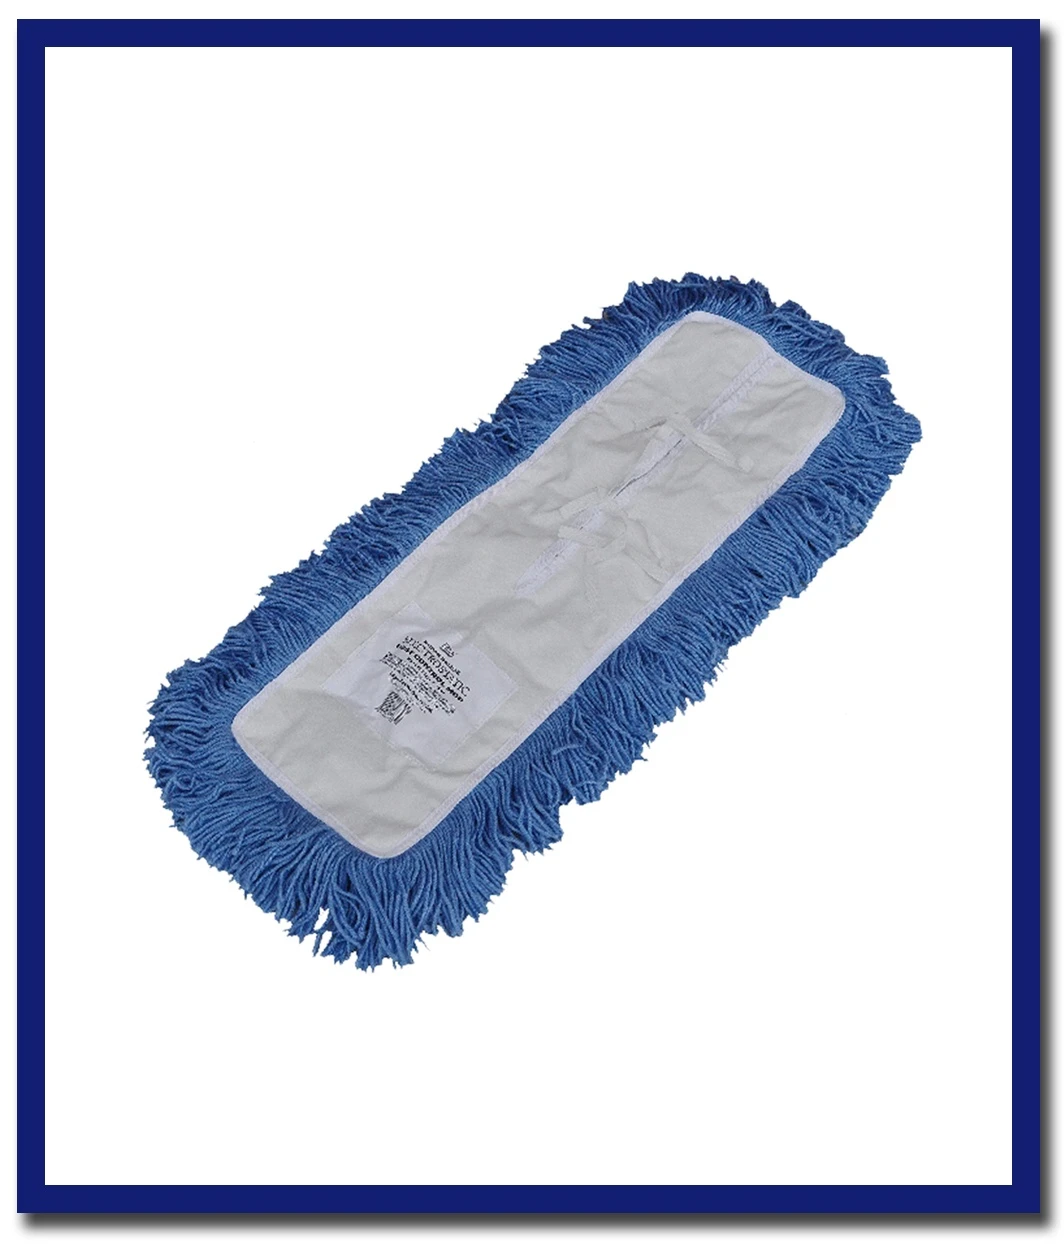 Edco Replacement Fringe Dust Control Mop - 1 Pc - Stone Doctor Australia - Cleaning Products > Mopping > Replacement Fringe